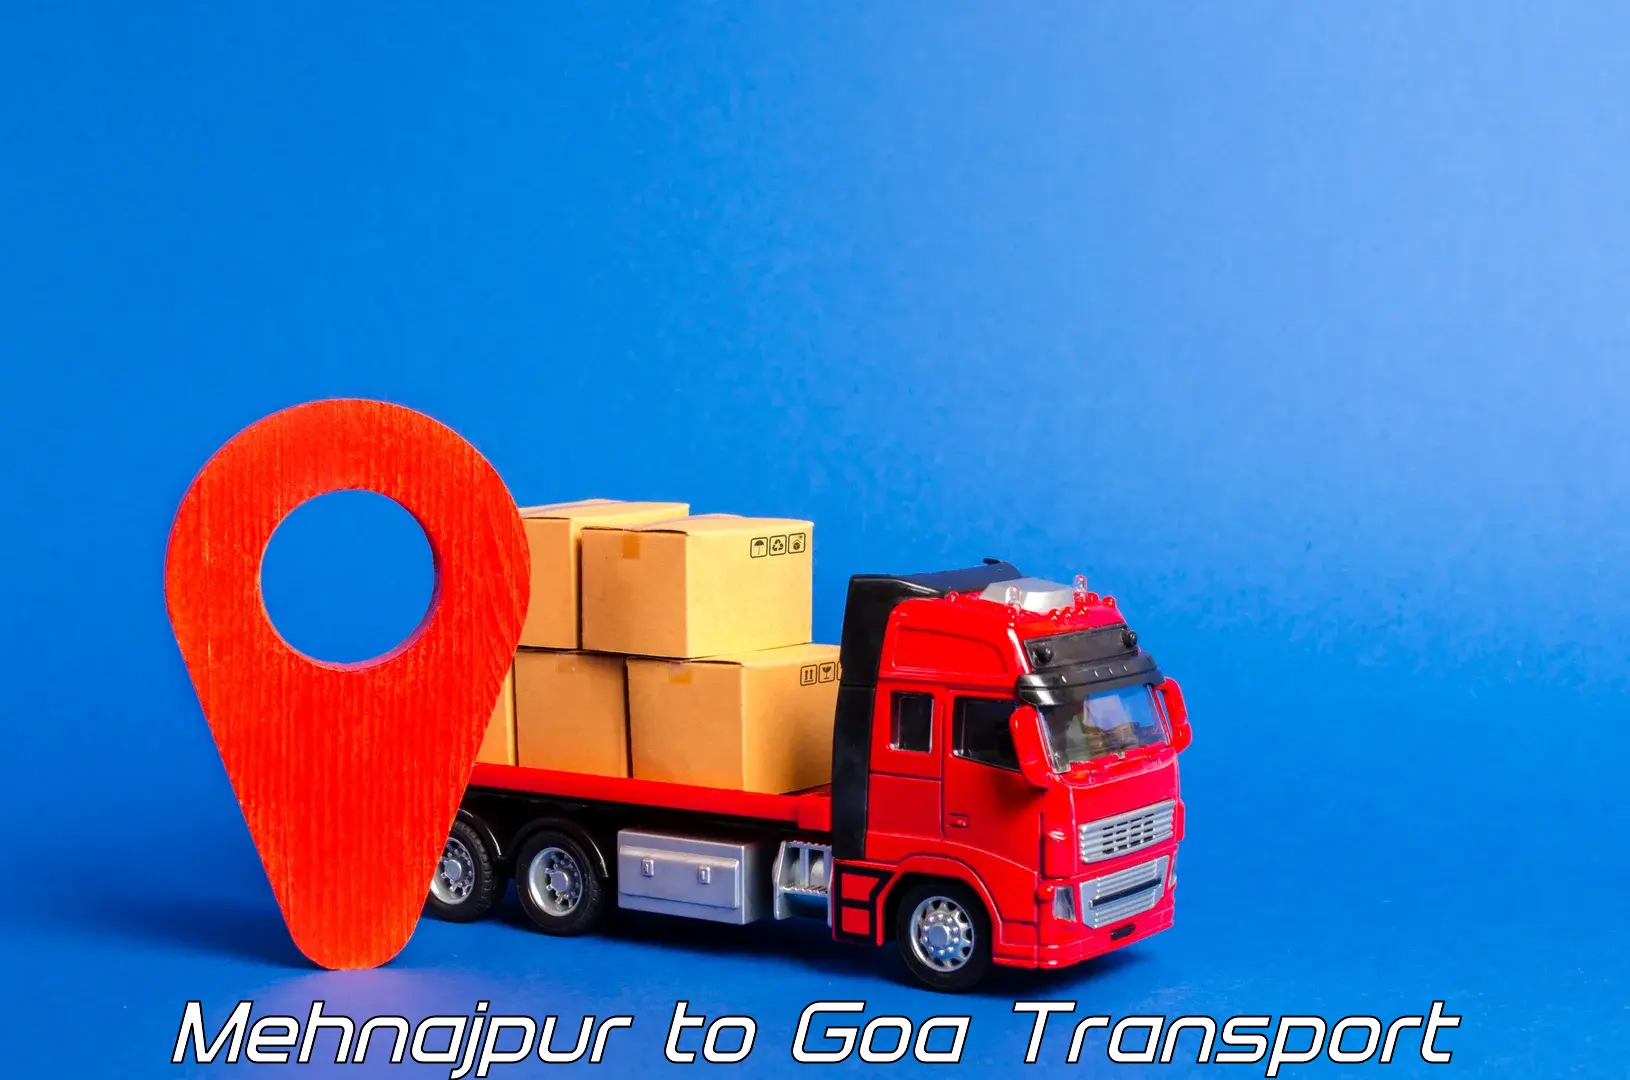 Commercial transport service Mehnajpur to Panjim